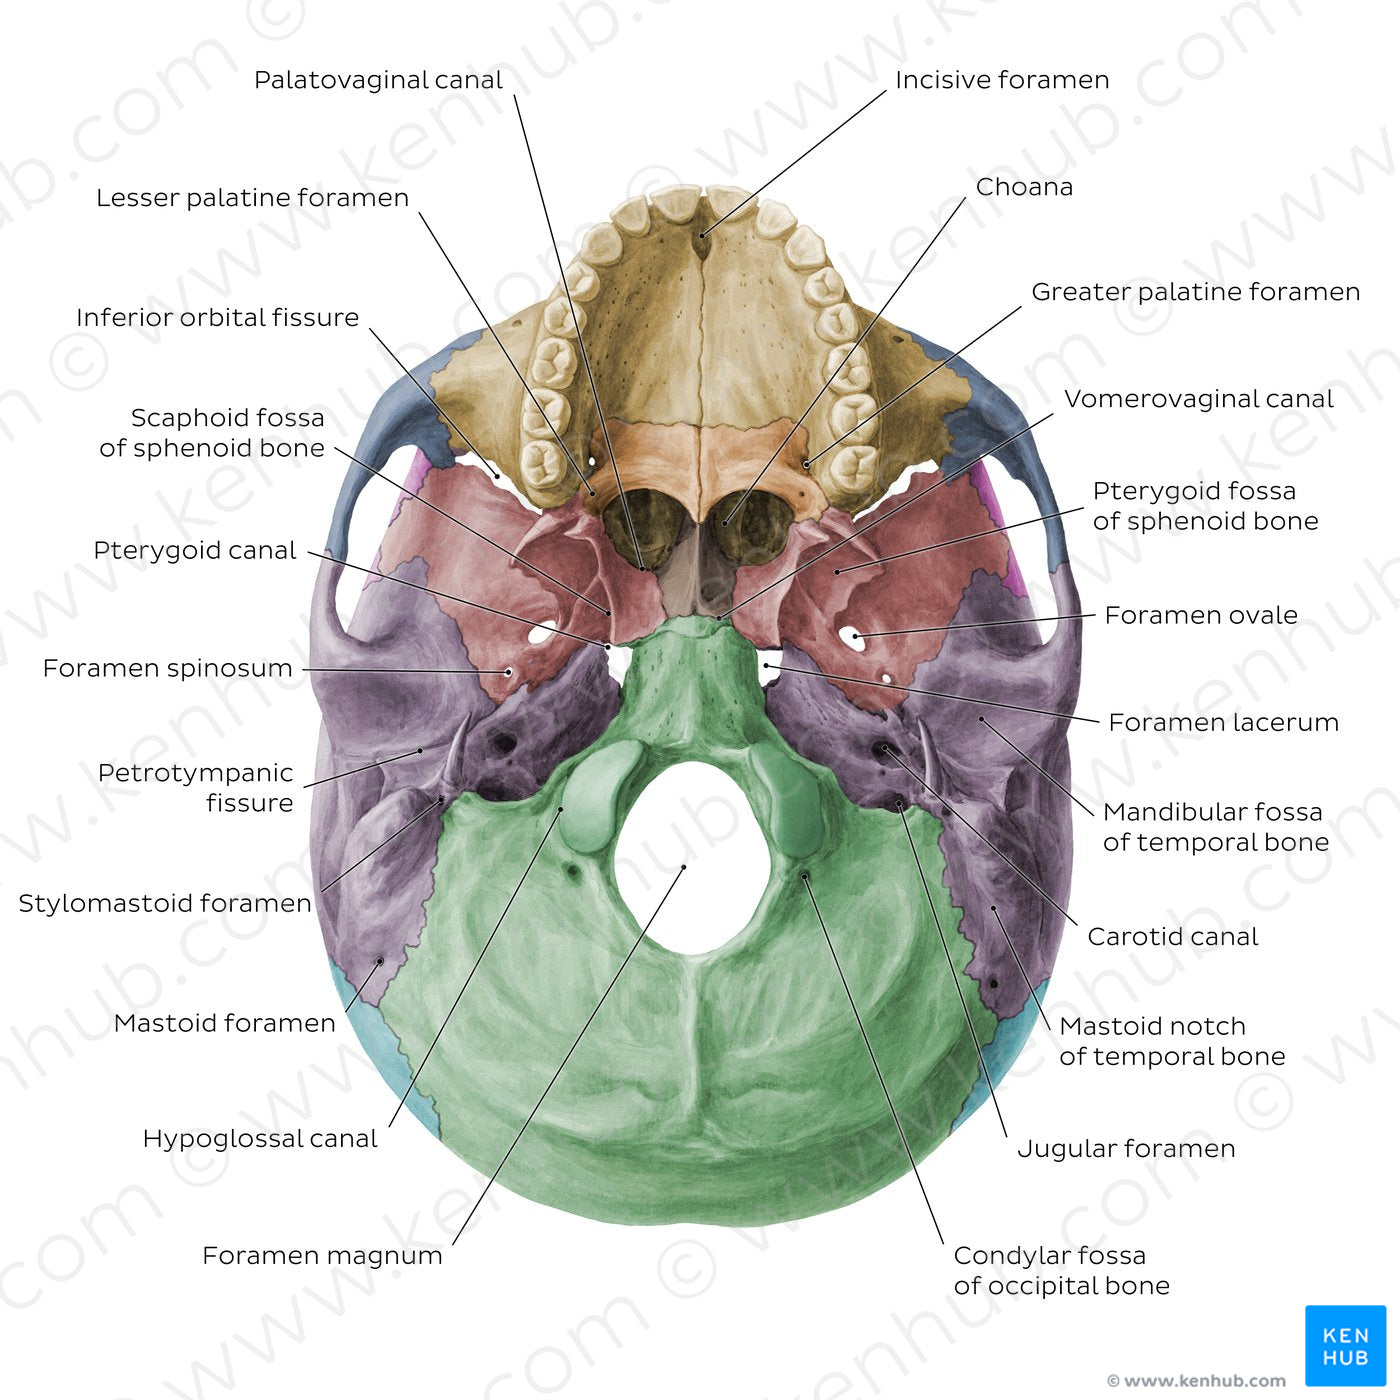 Inferior base of the skull - Foramina, fissures, and canals - Colored (English)